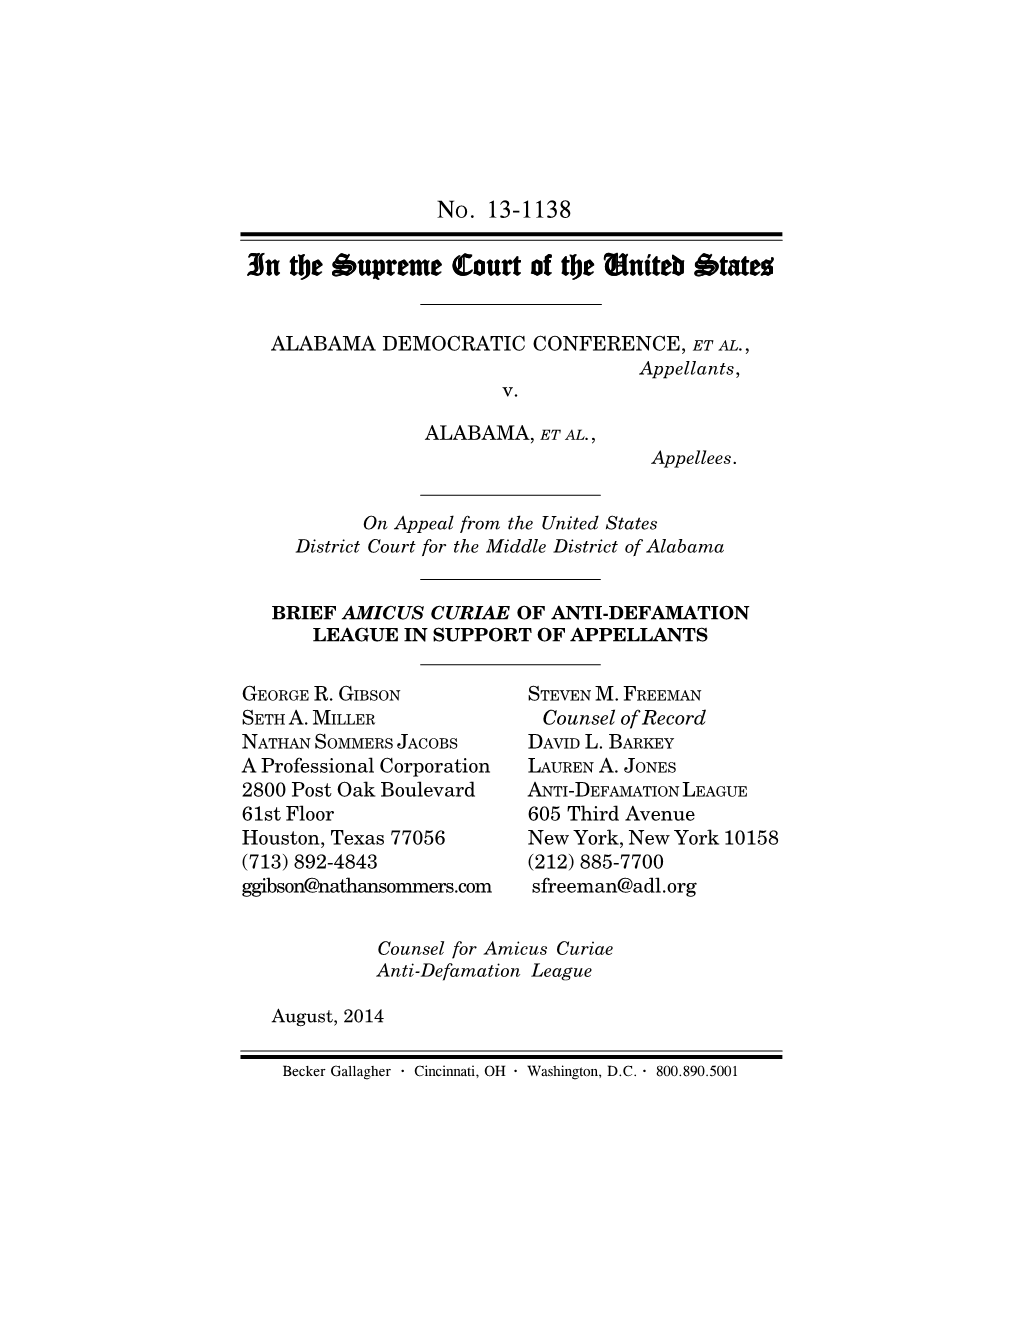 Anti-Defamation League Amicus Brief in Support of Appellants